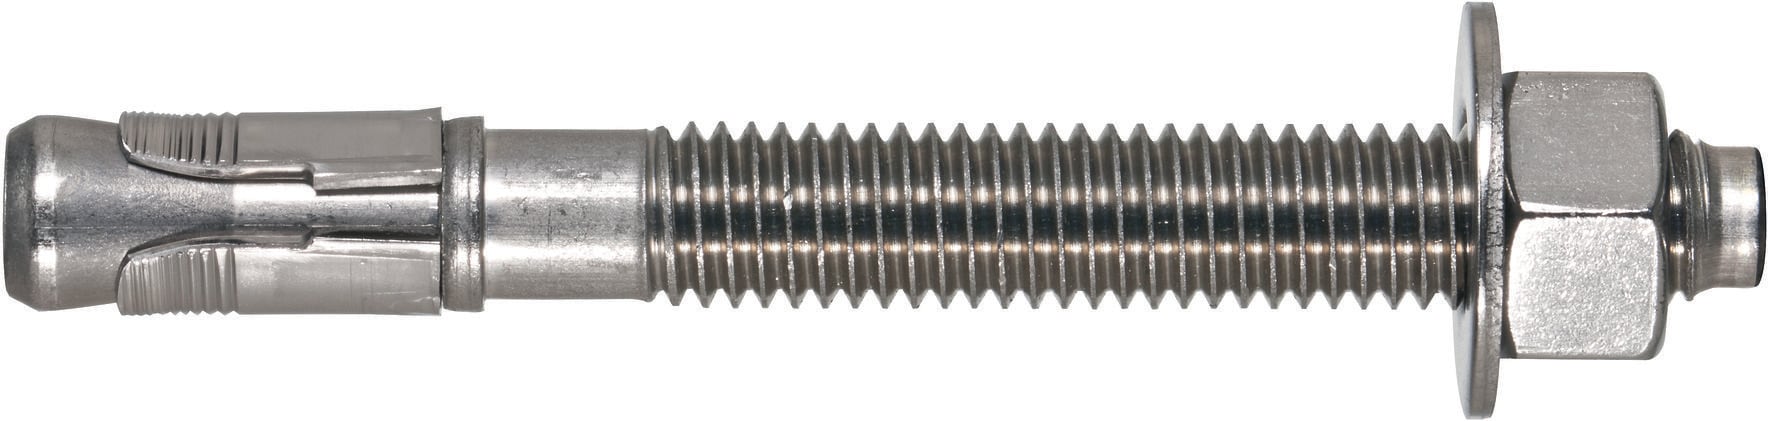 Kwik Bolt 3 Long Thread Carbon Steel Expansion Anchors 20-Pack x 3-3/4 in Hilti 3/8 in 